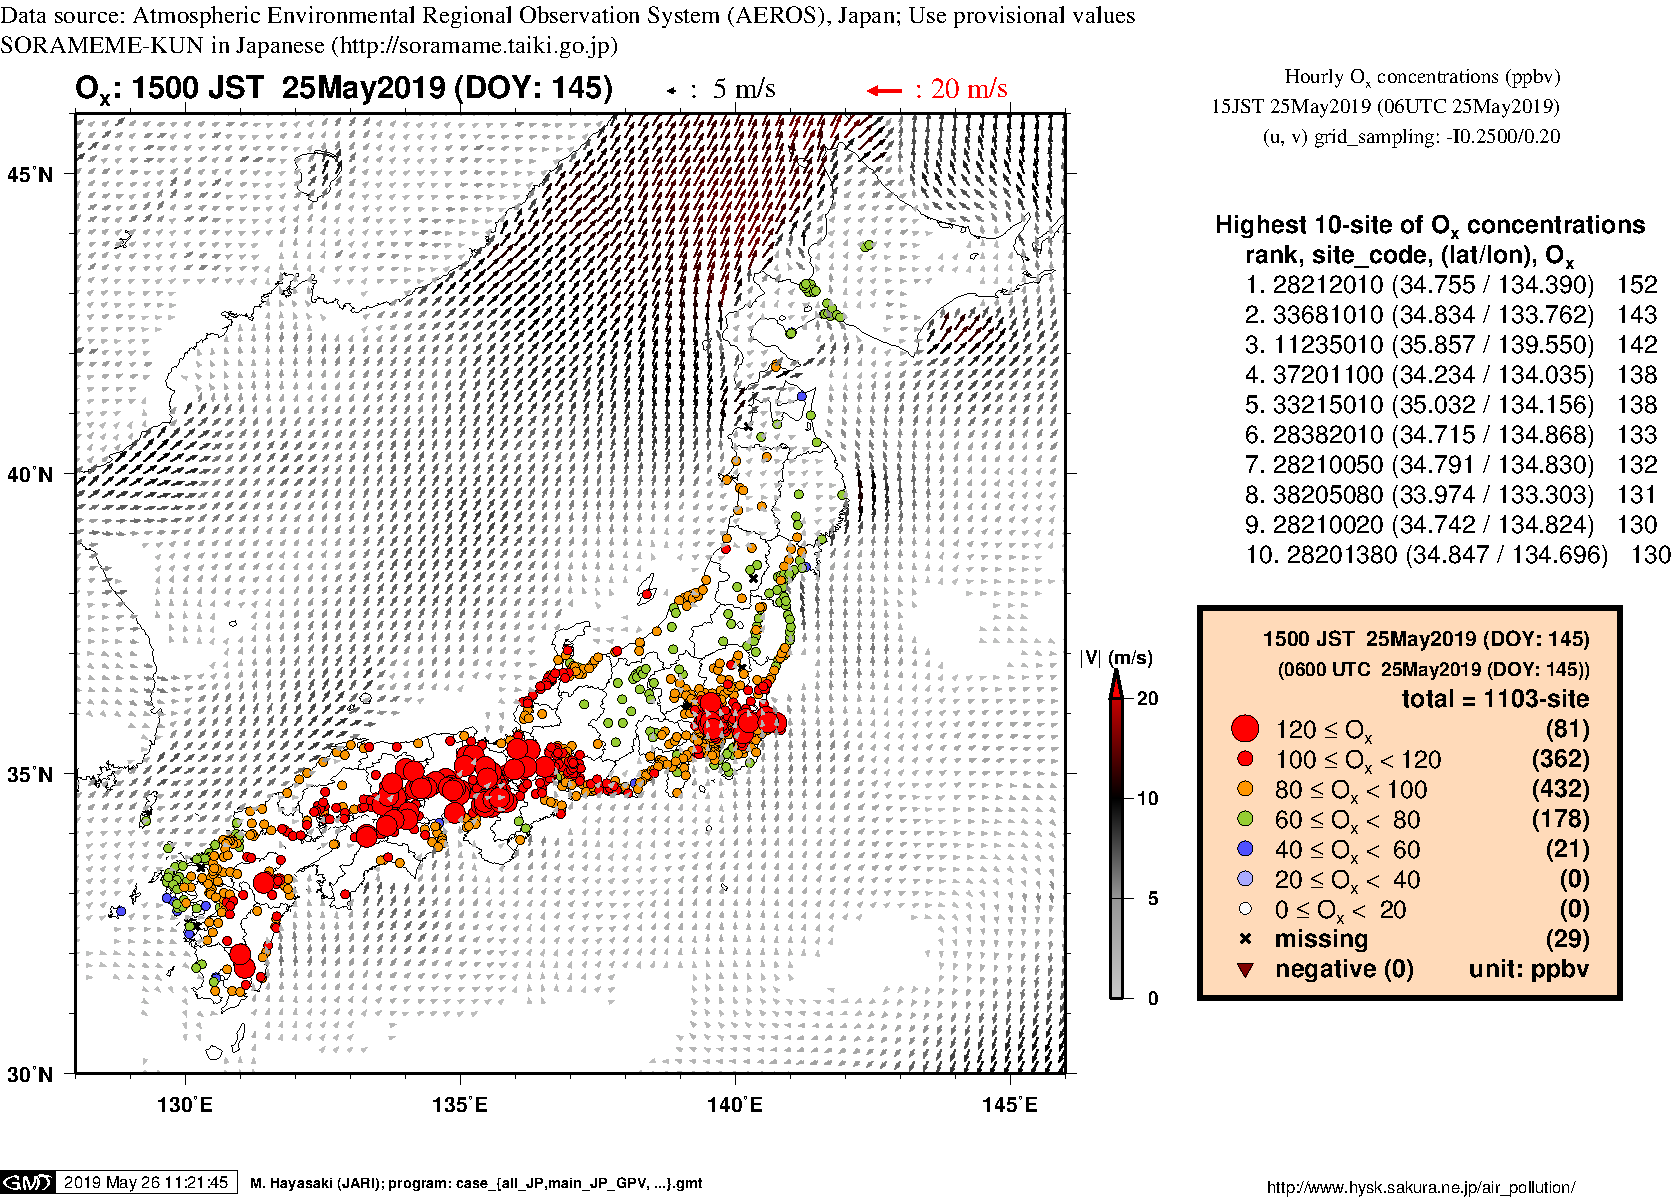 Ox concentration in mainland Japan (15JST 25May2019)